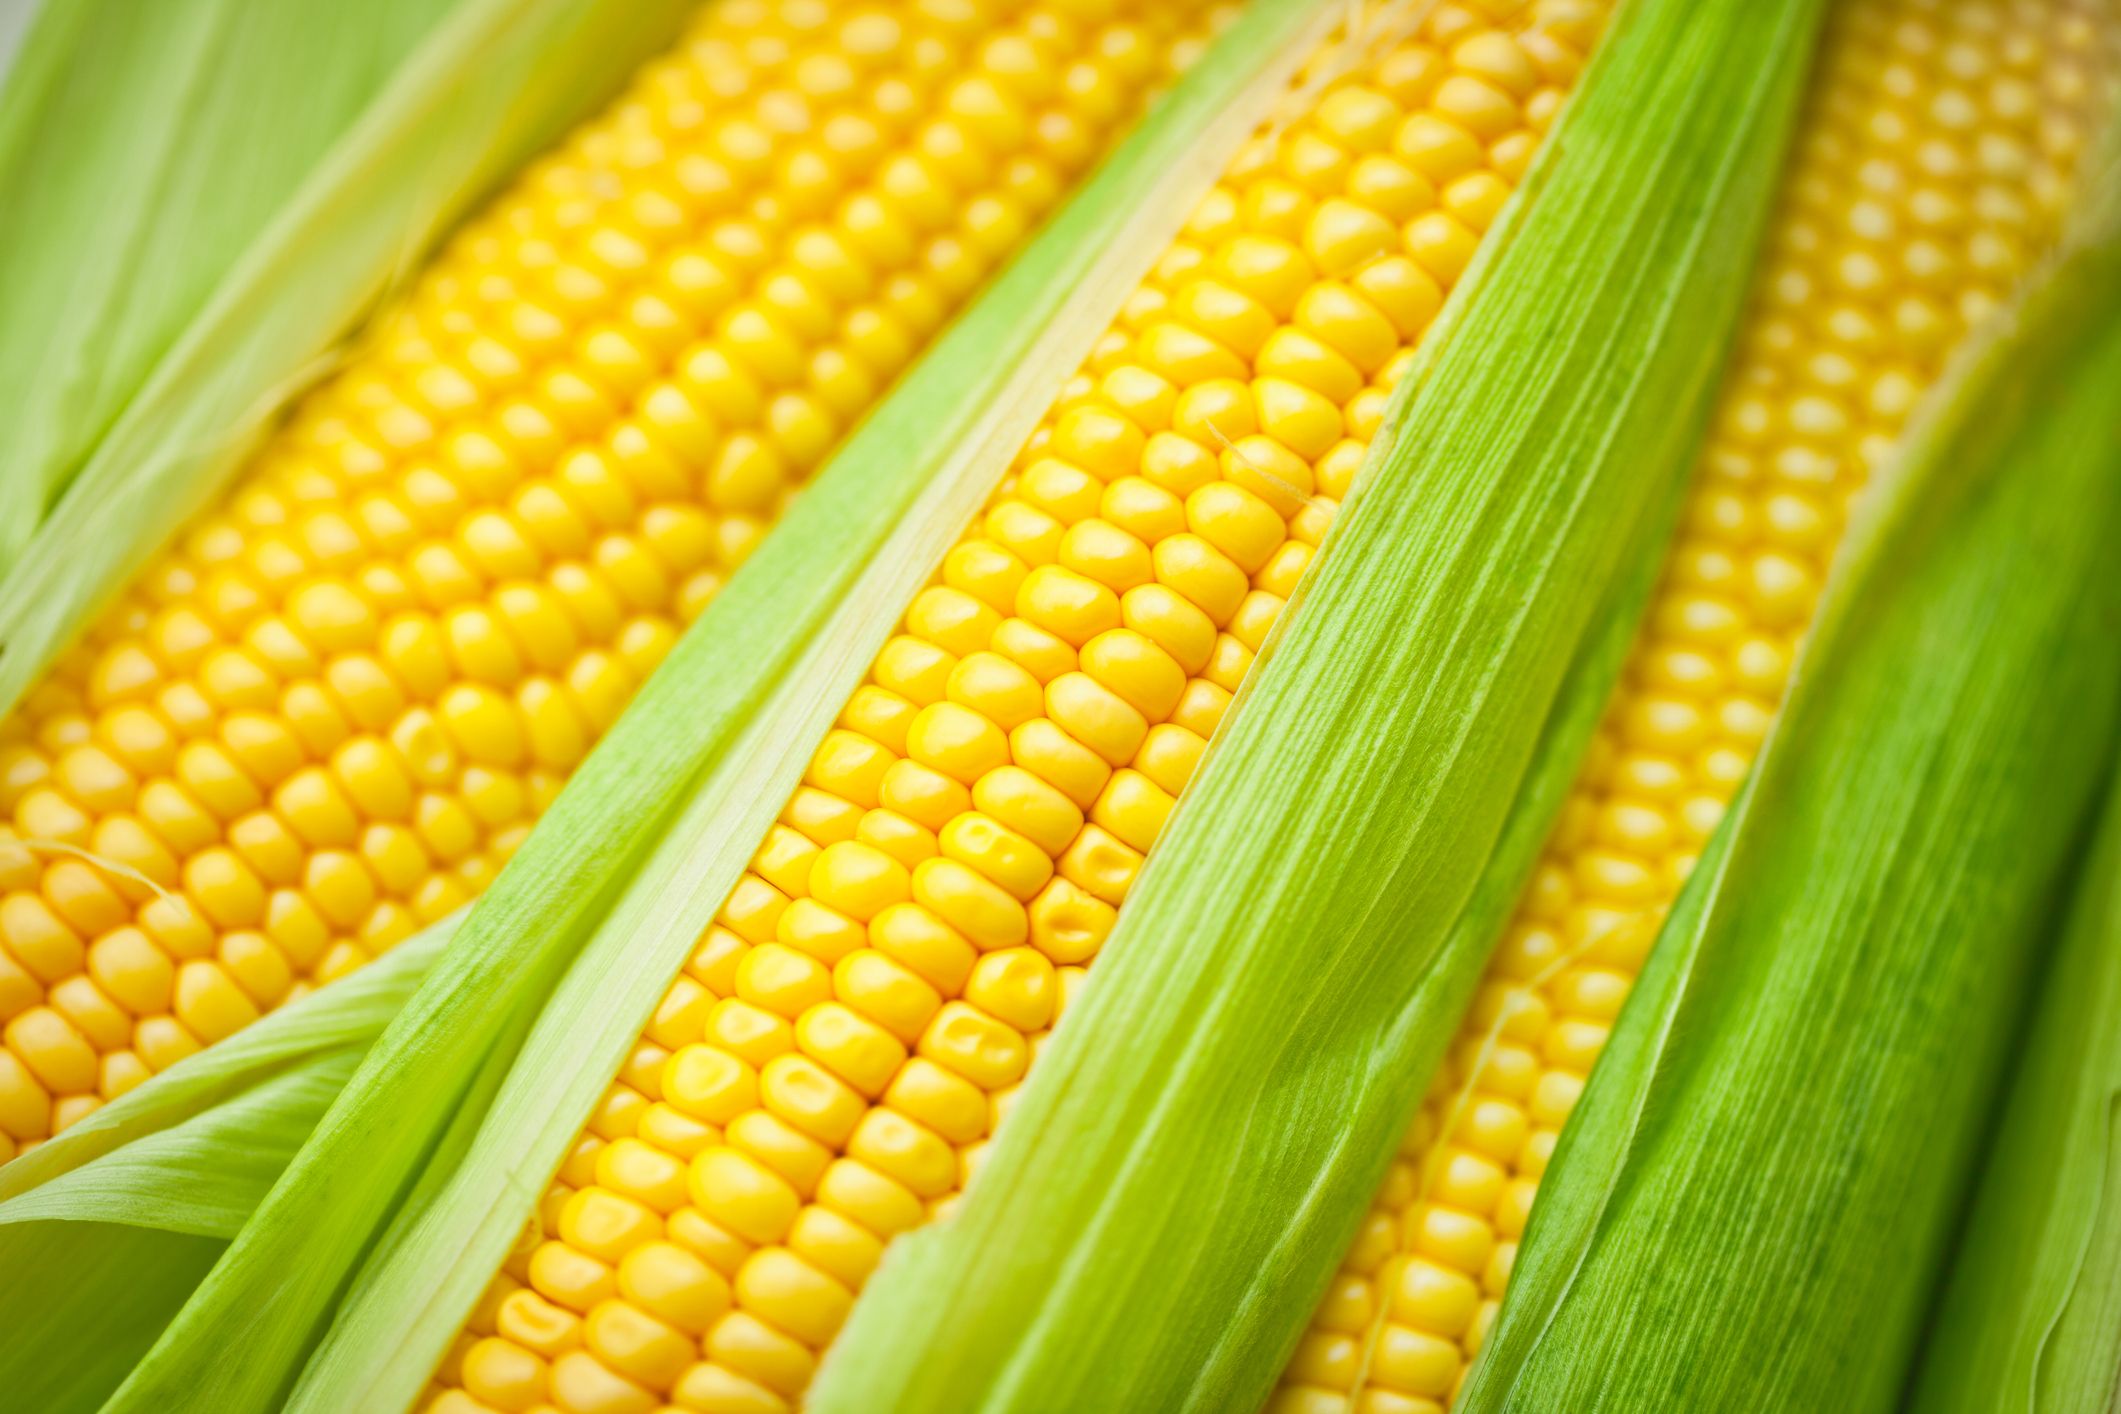 Is Corn a Vegetable or Something More?